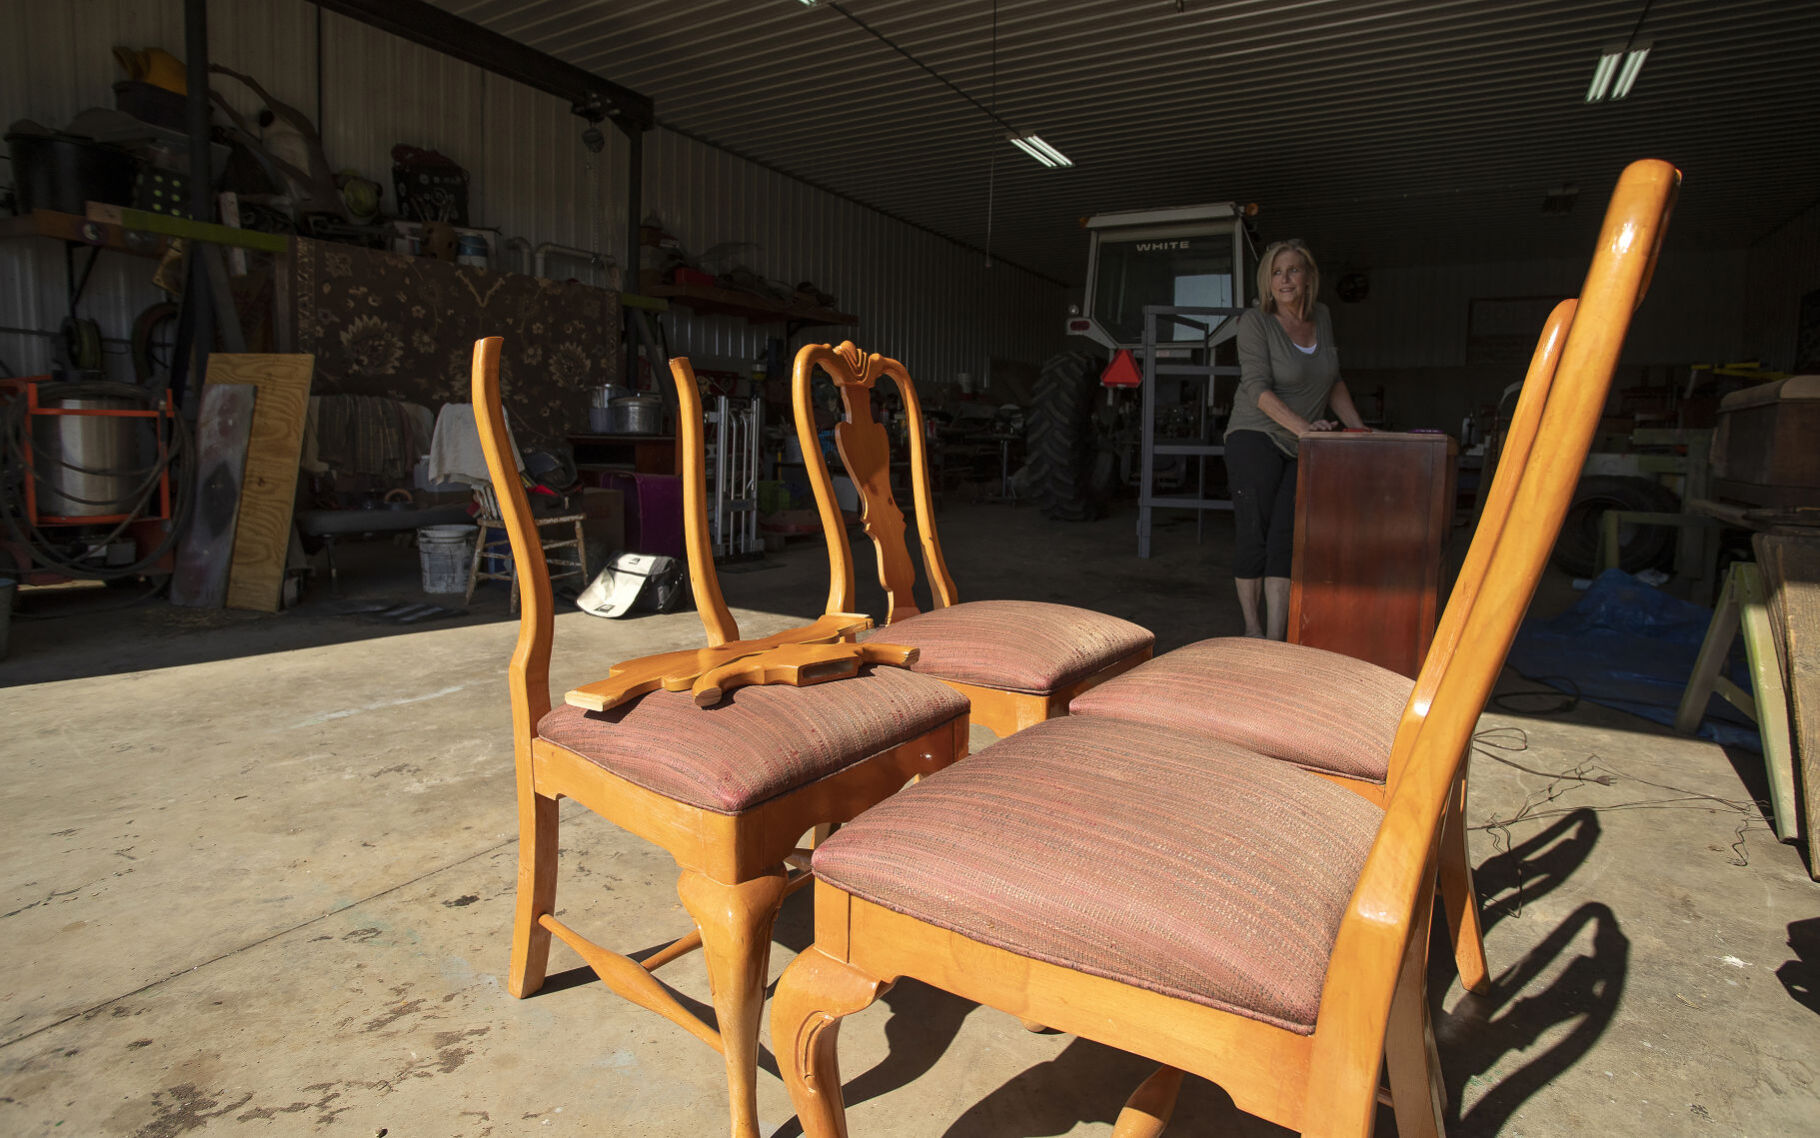 Four chairs await her attention as Dana Boltax works on a piece of furniture in her shop.    PHOTO CREDIT: Stephen Gassman